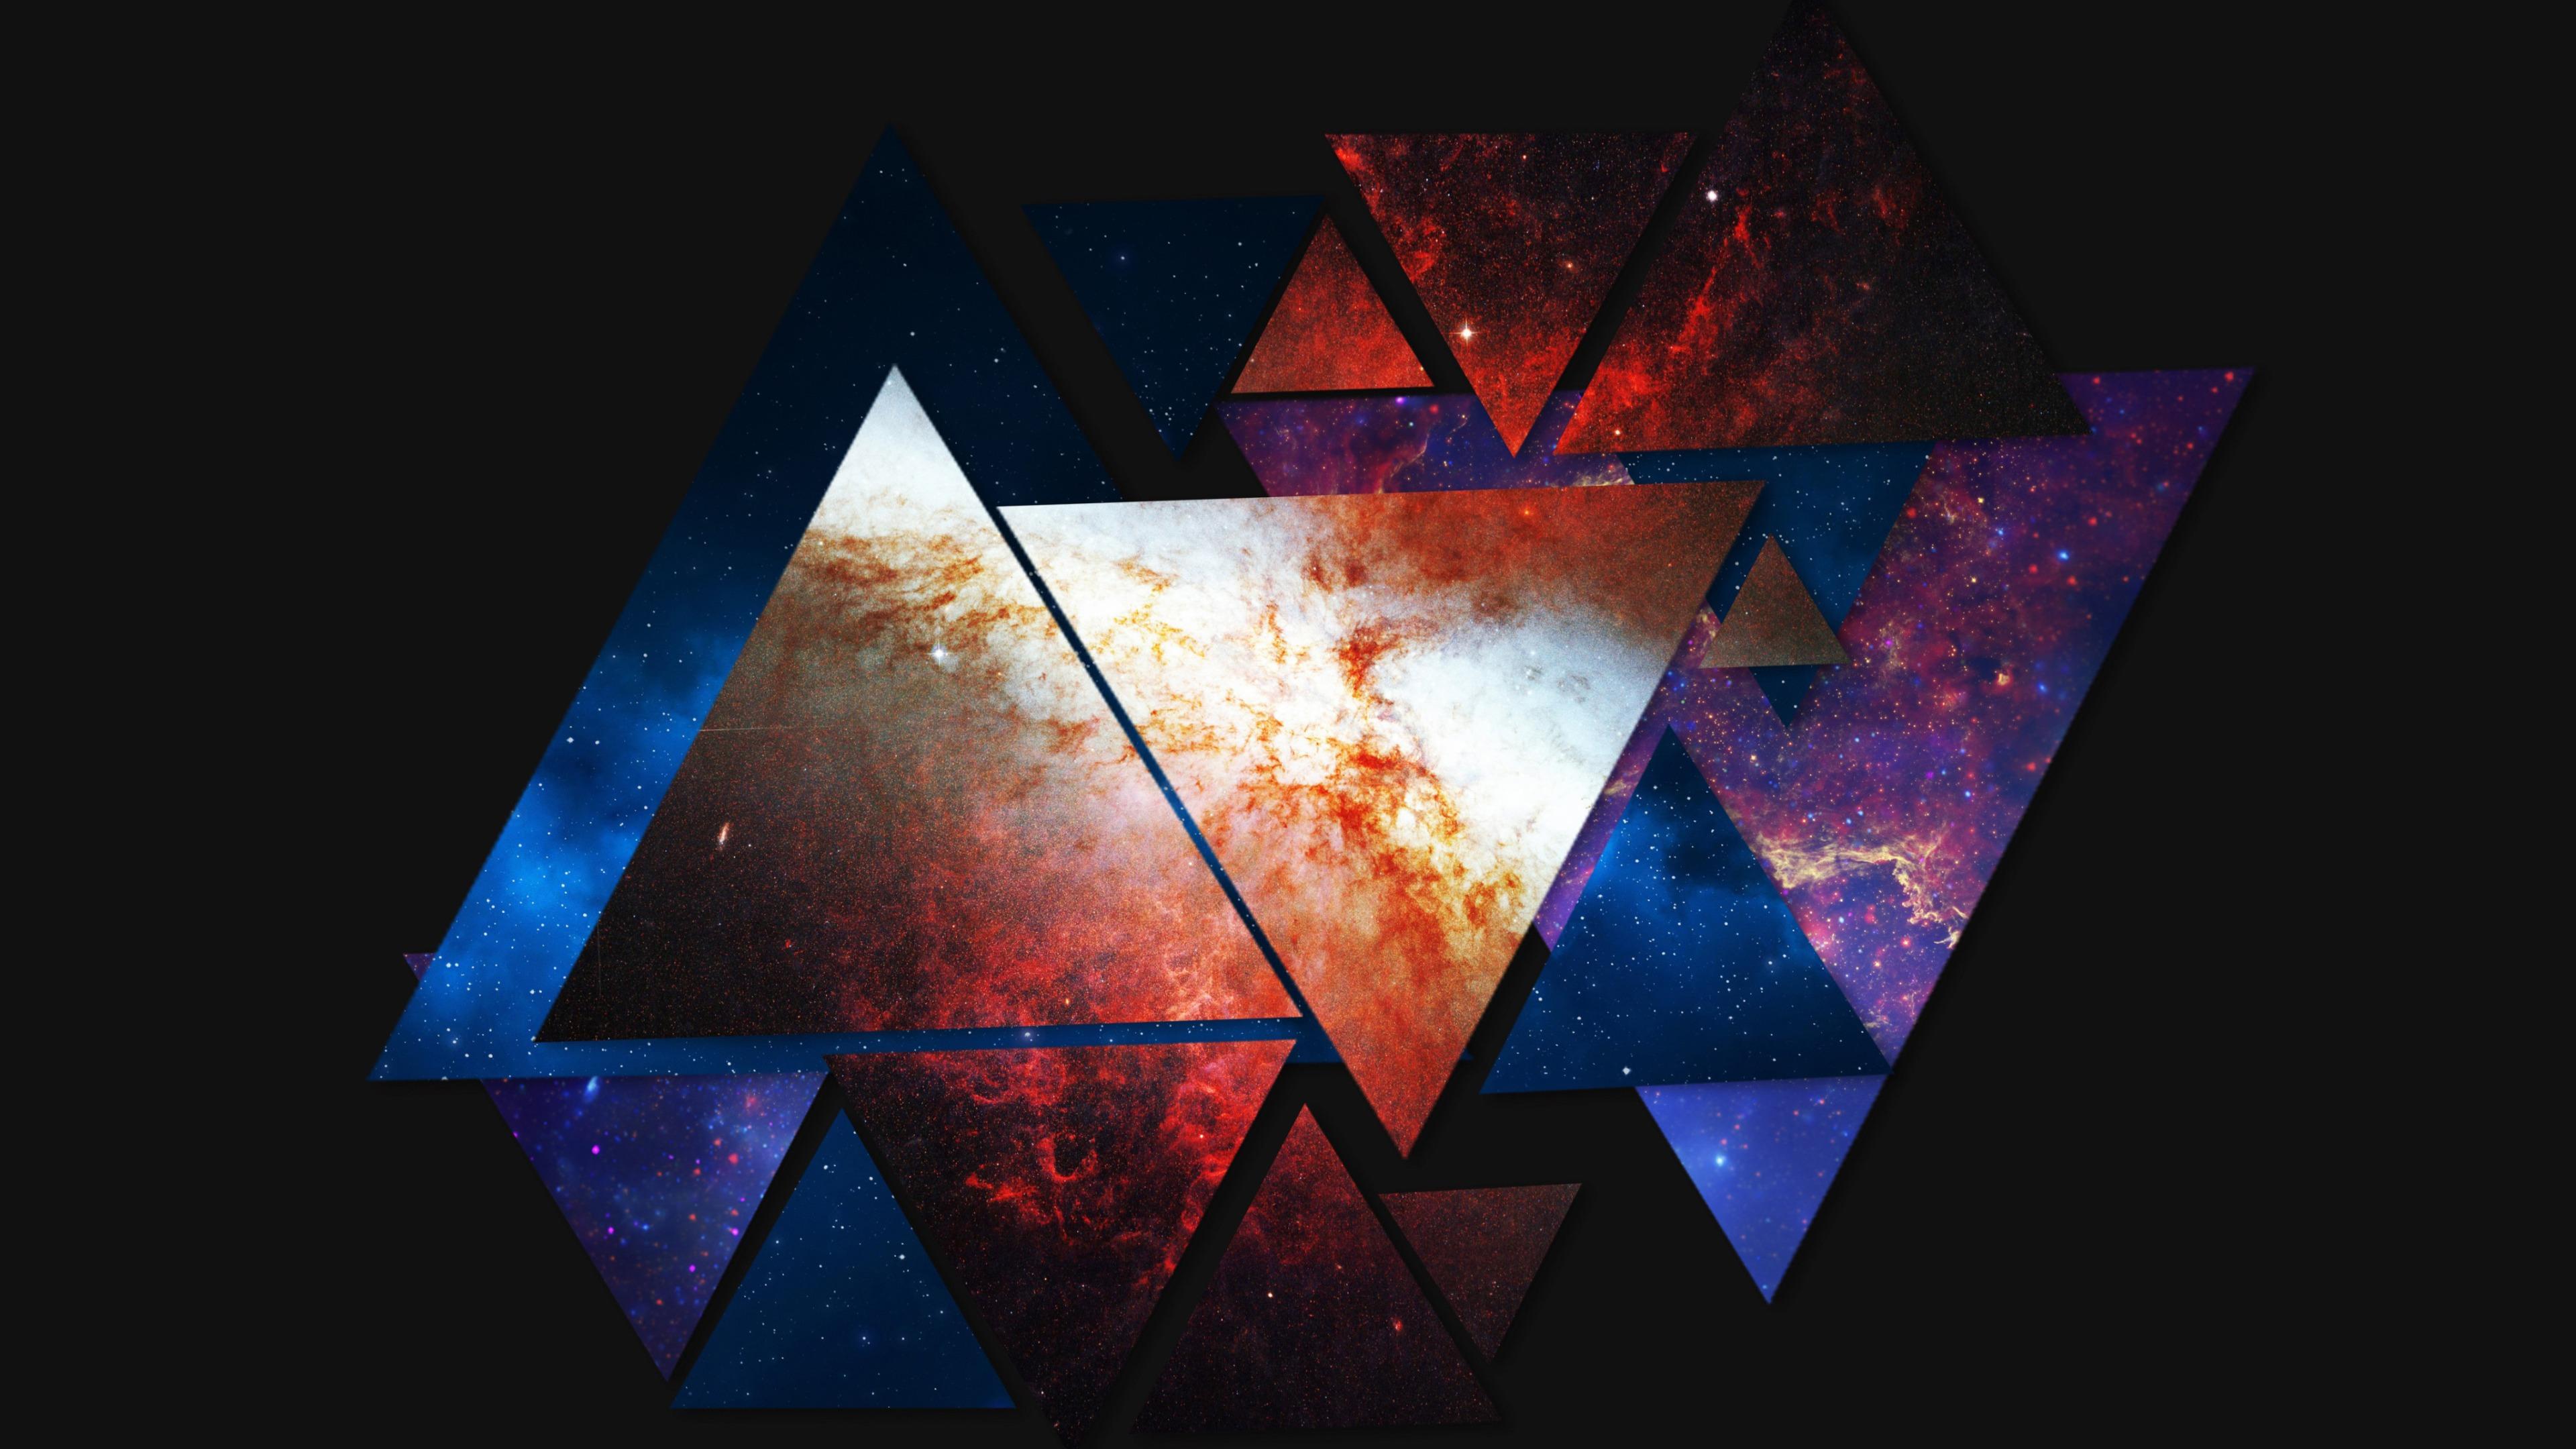 Abstract Galaxy Wallpapers